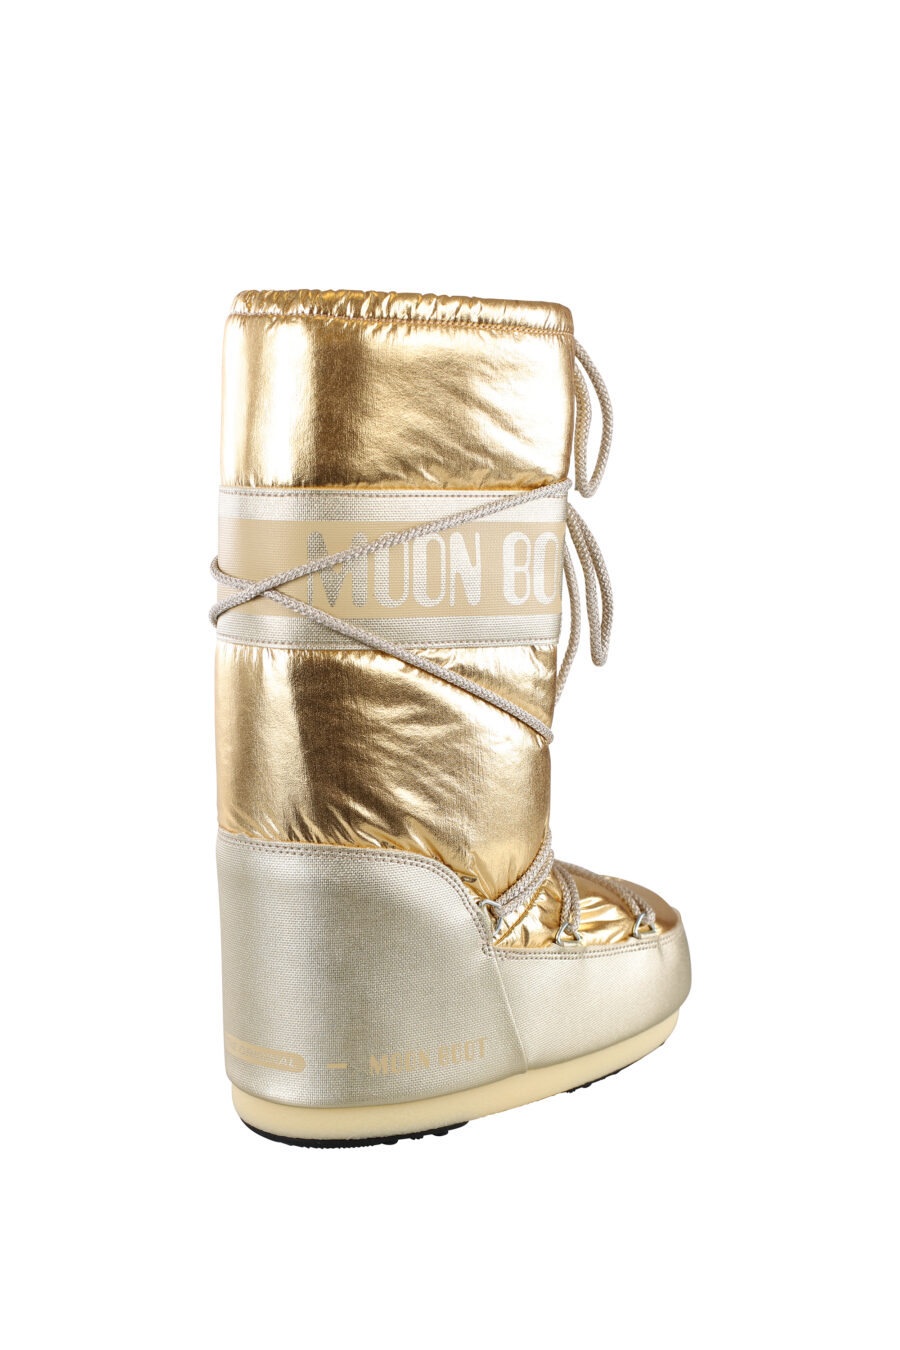 Gold shiny snow boots with gold logo - IMG 6727